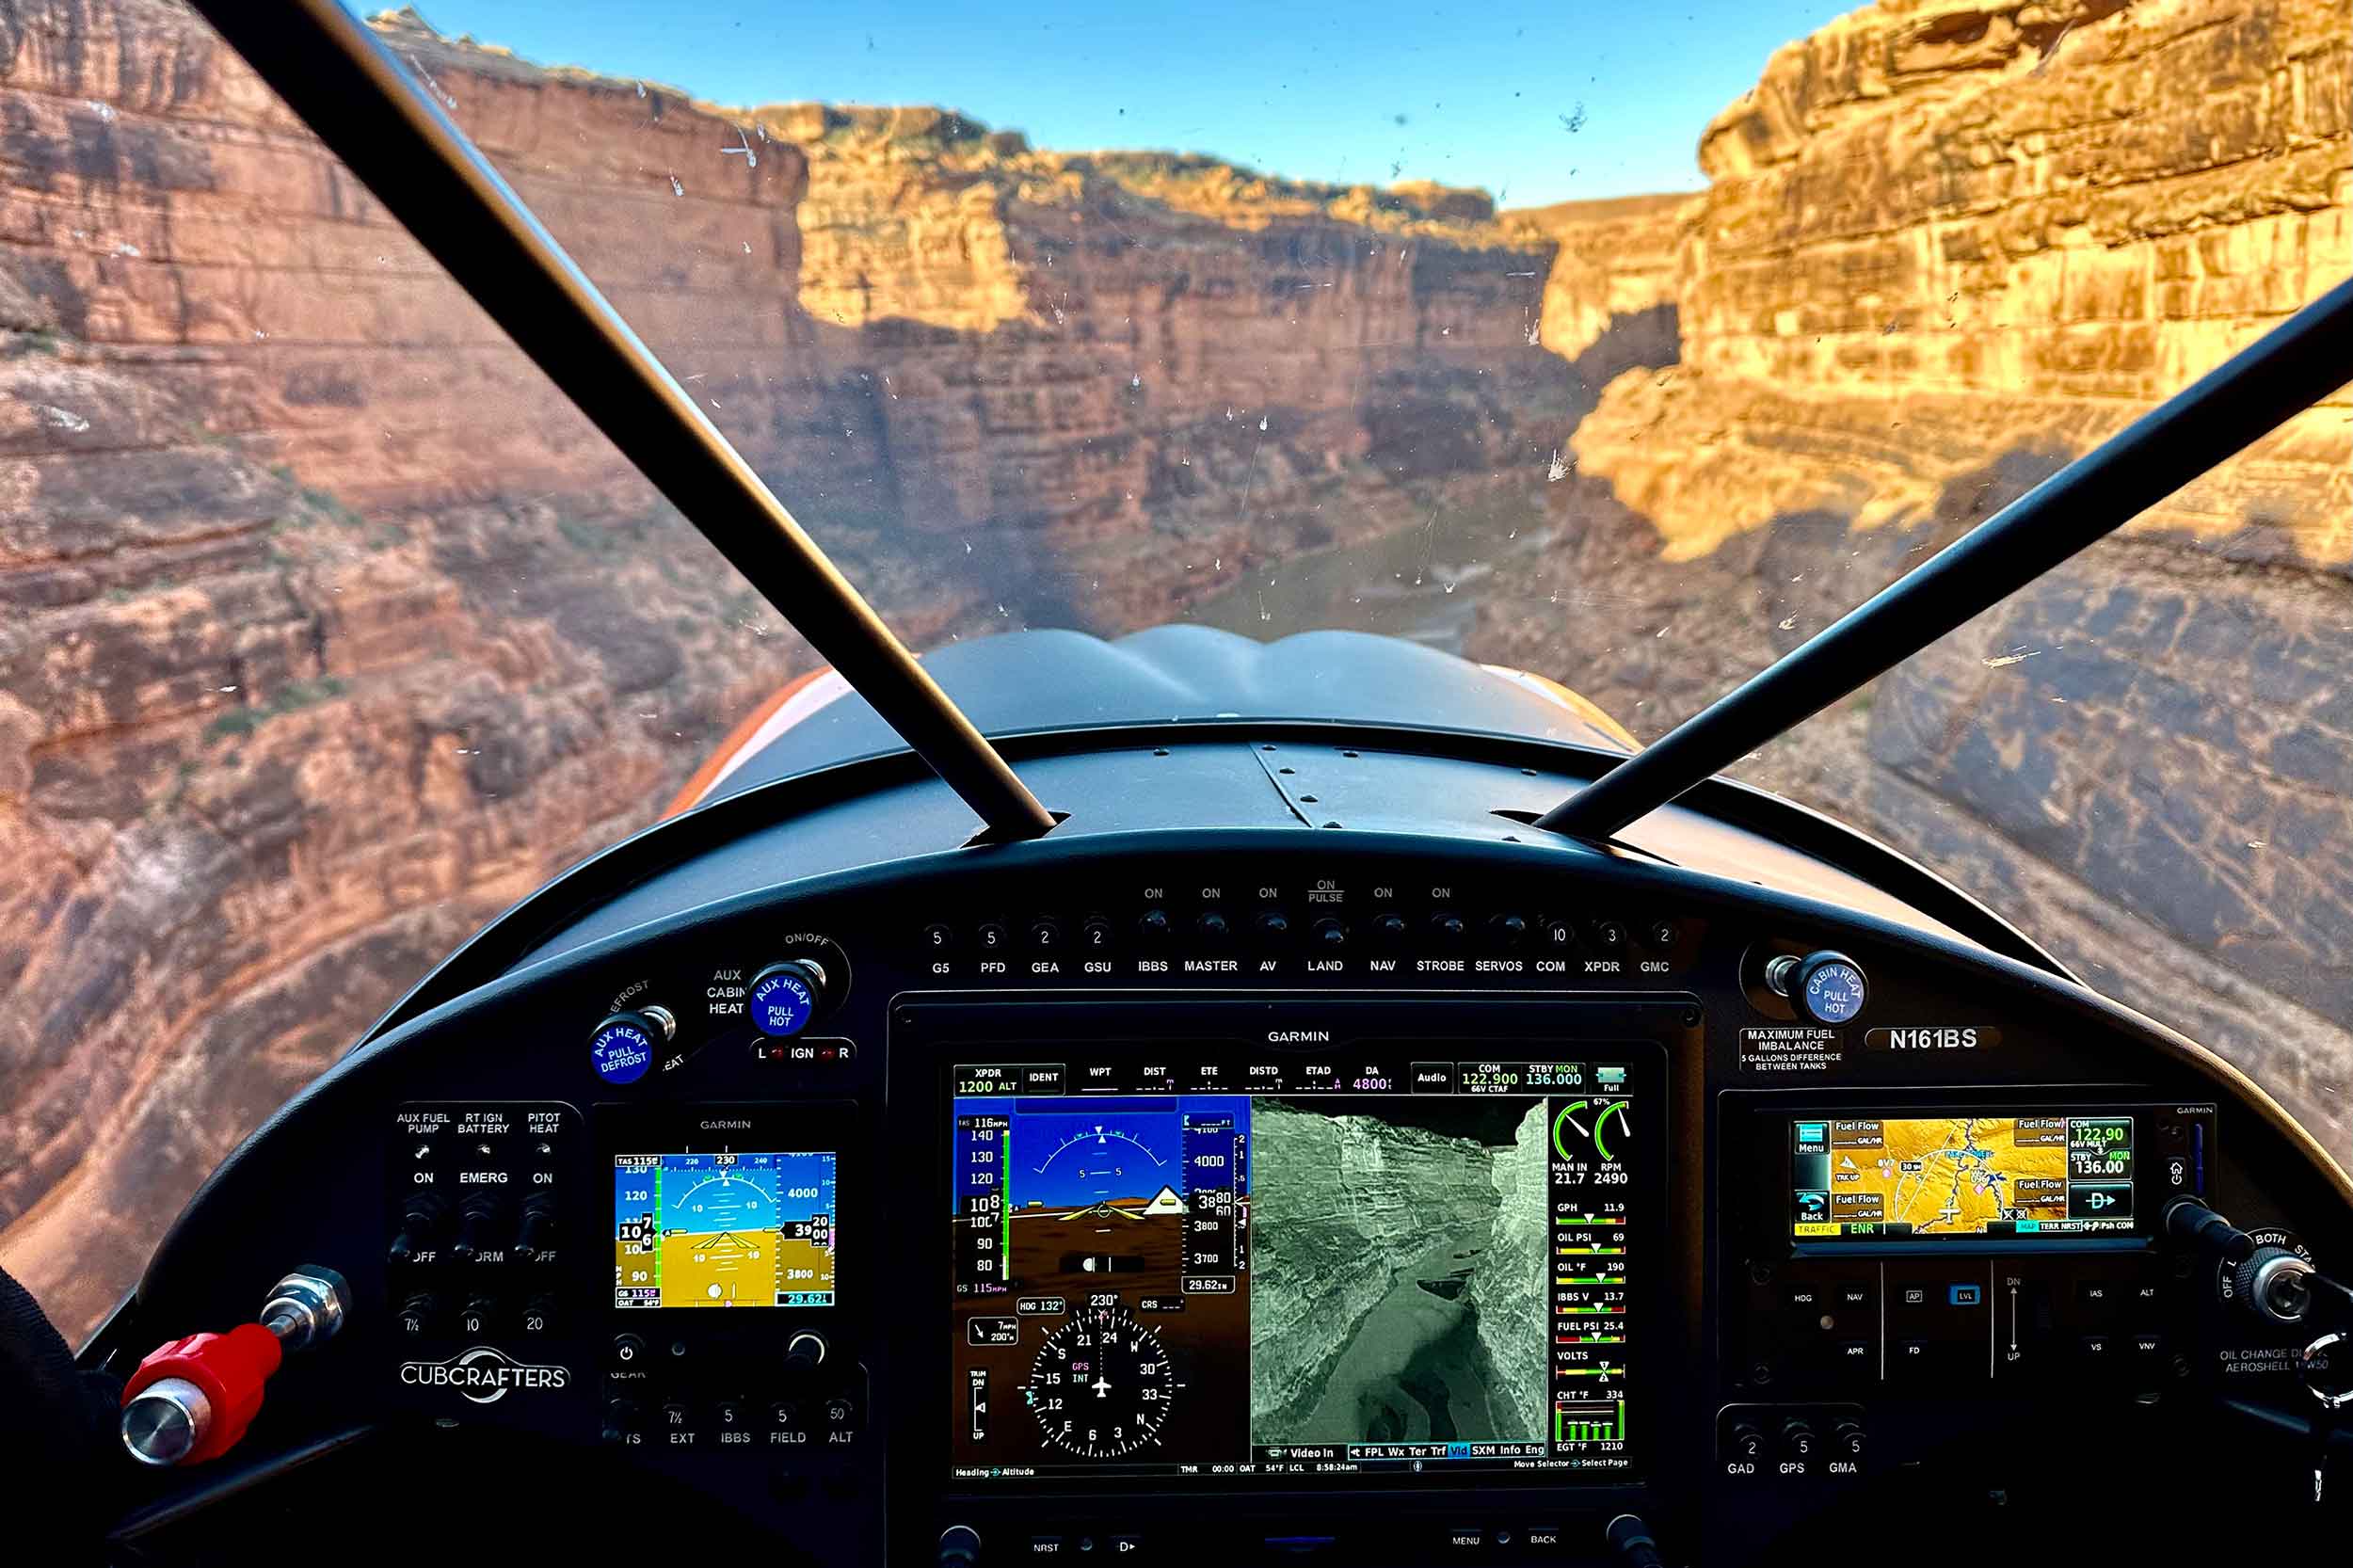 Not sure anyone would take their eyes off the canyon sides to look at the display but this is what they'd see!